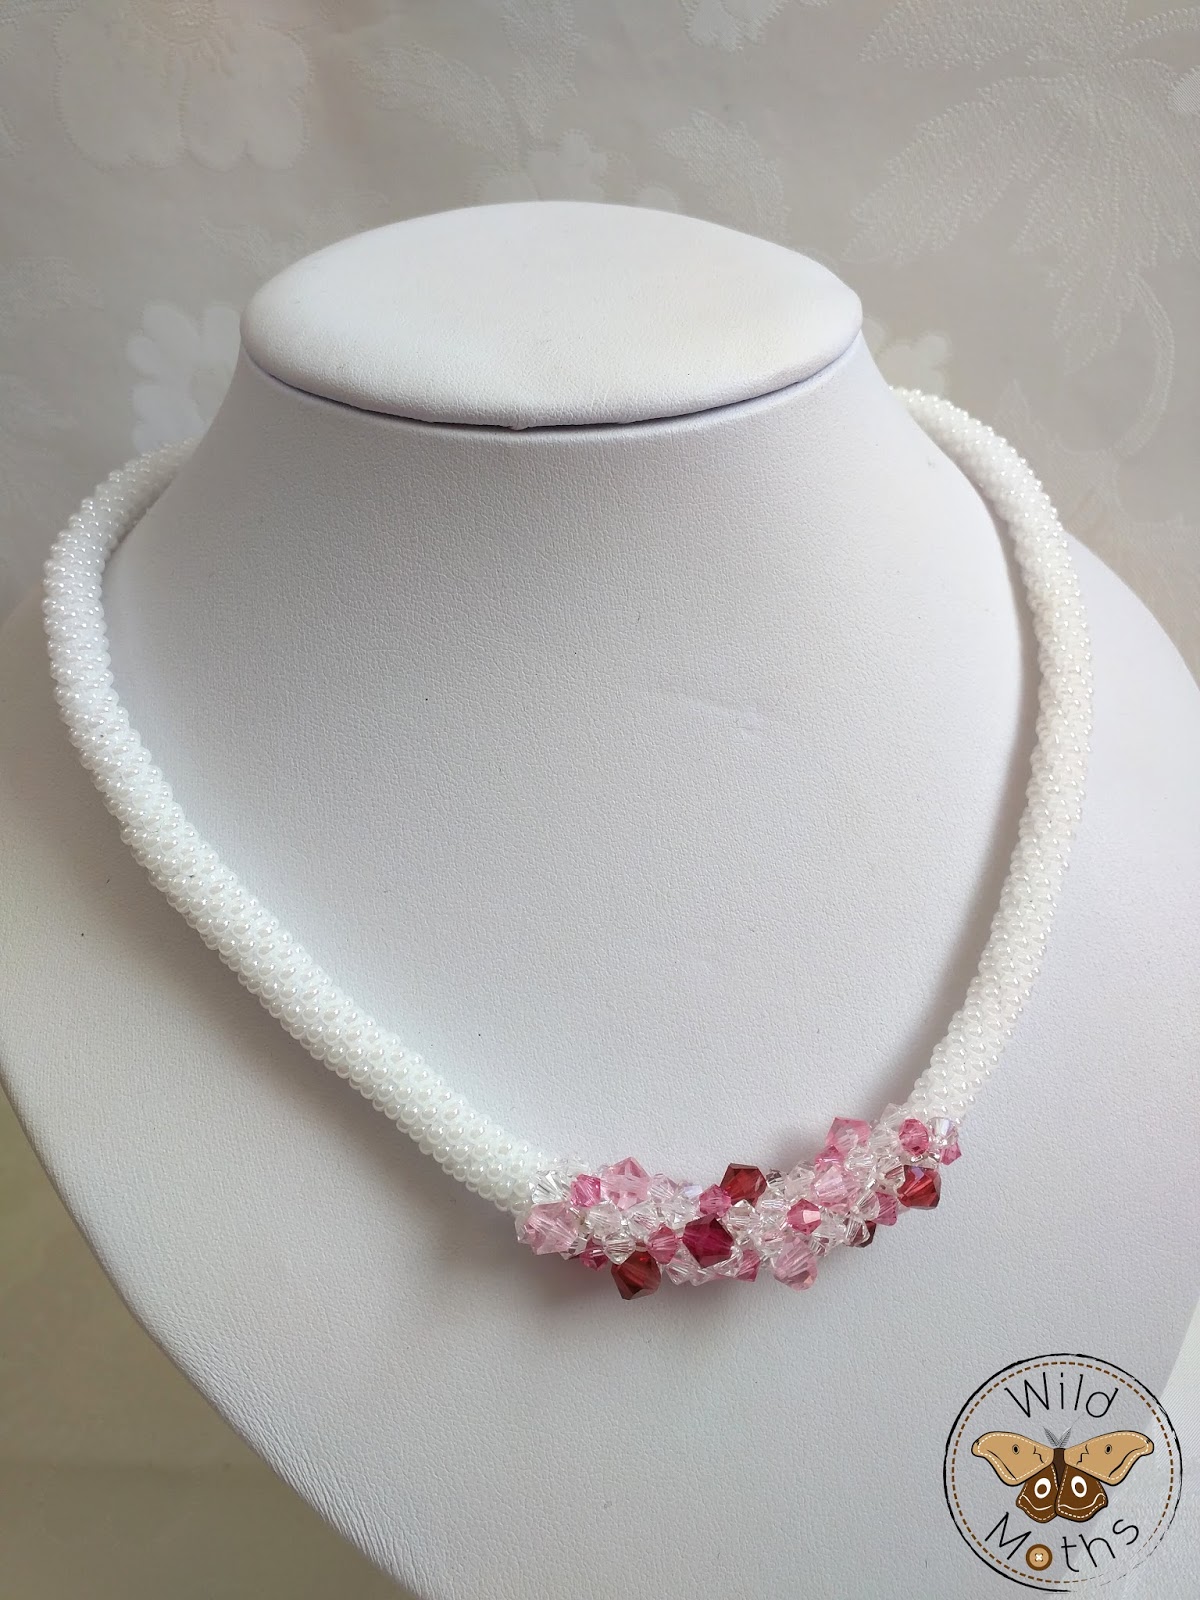 Wildmoths Handcrafted Creations: More Crochet Necklaces with Swarovski ...